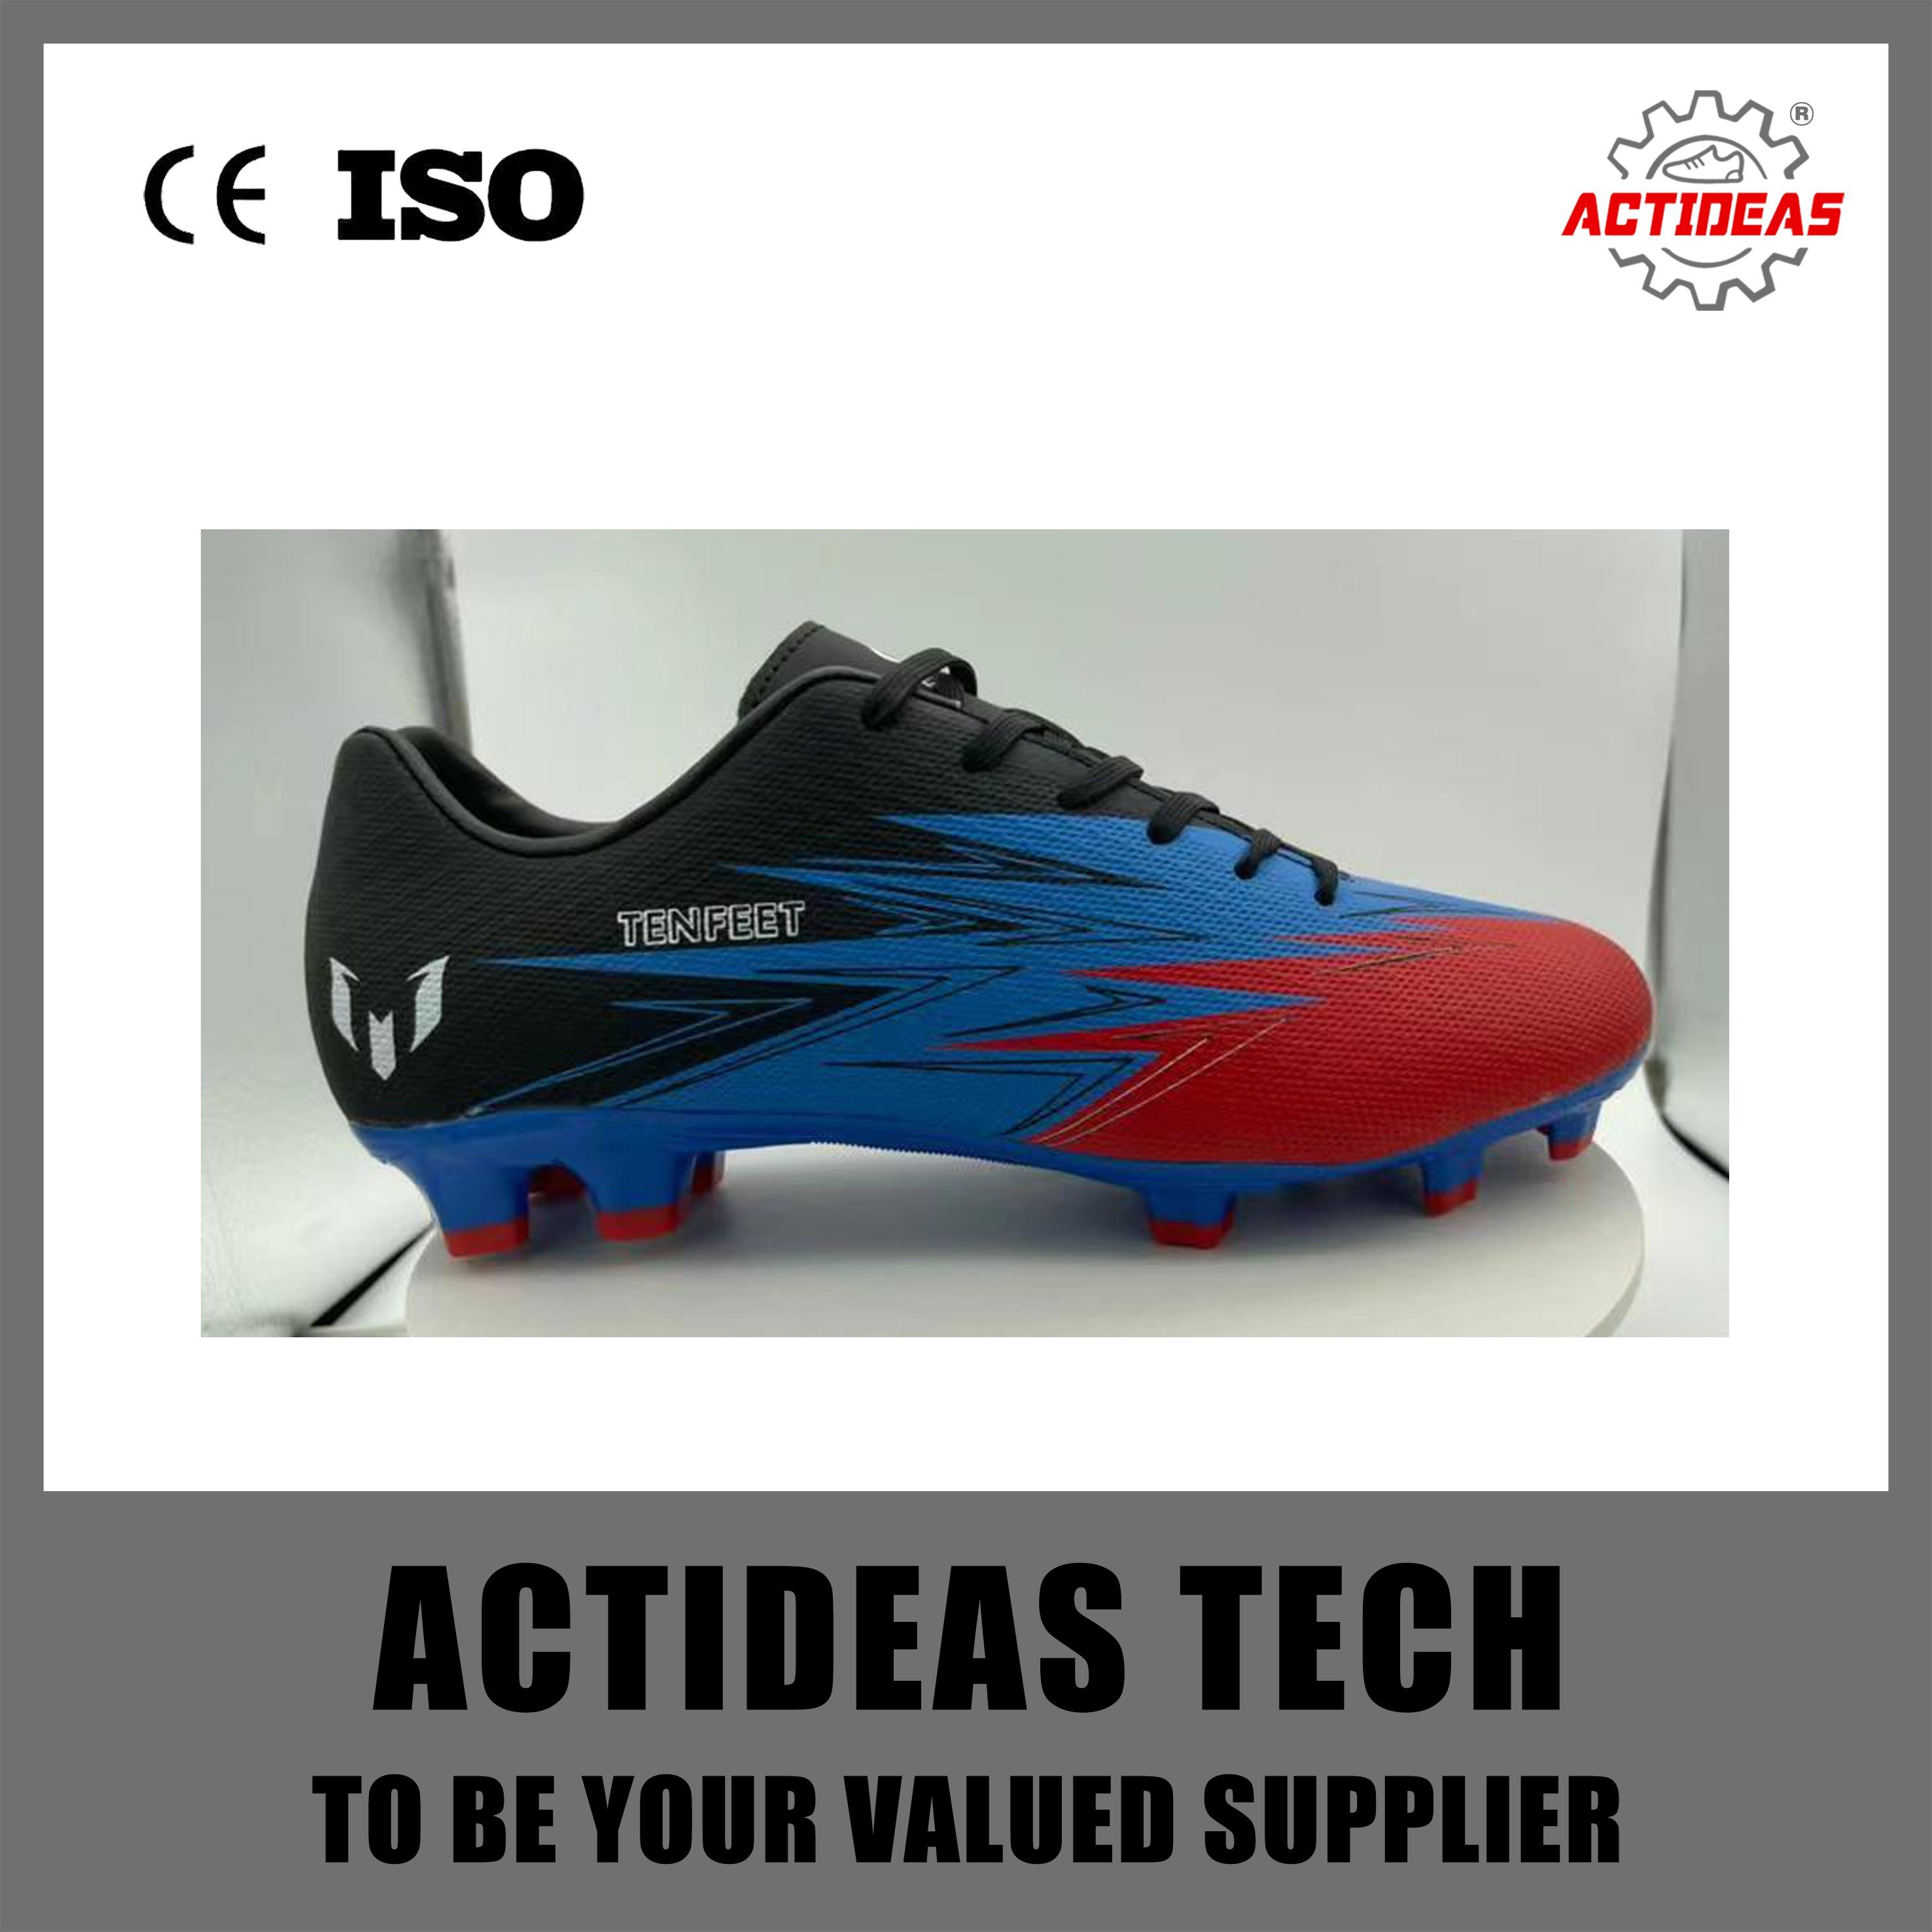 Low Top Soccer Shoes Society Spikes Size 35-45 Men′s Soccer Shoes Futsal Turf Football Shoes